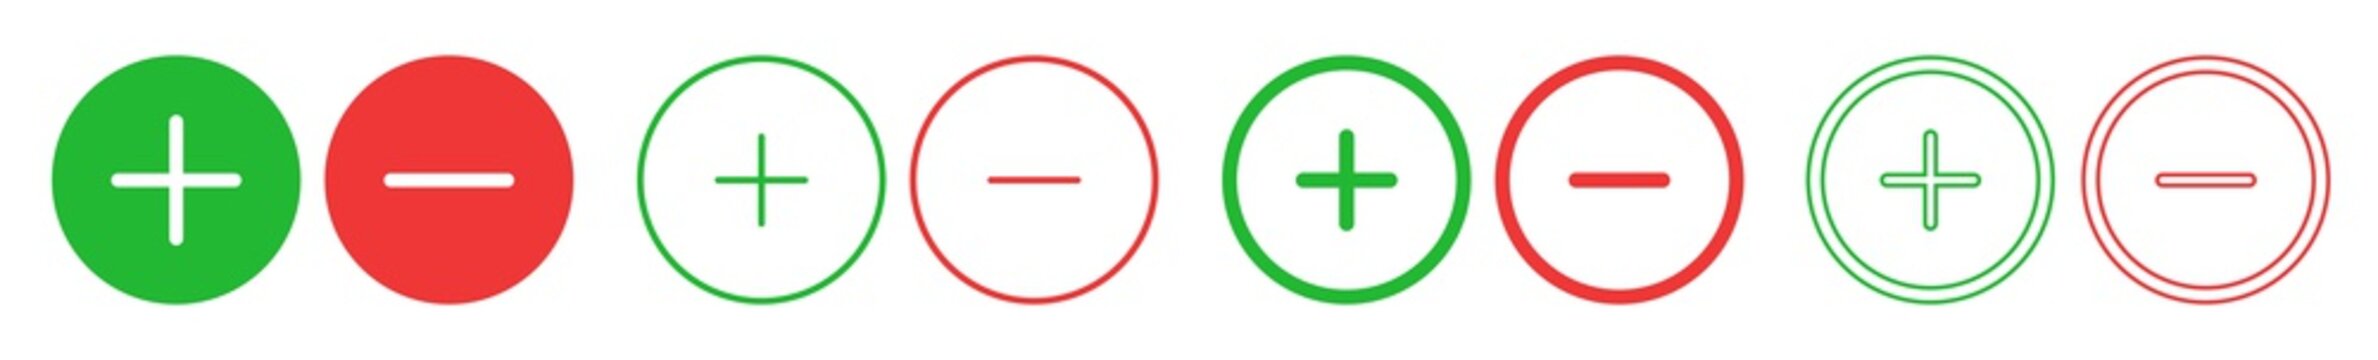 Plus Minus Icon Red Green | Positive Negative Buttons Illustration | Con Pro Symbol | Vote Logo | Zoom In Out Sign | Isolated | Variations